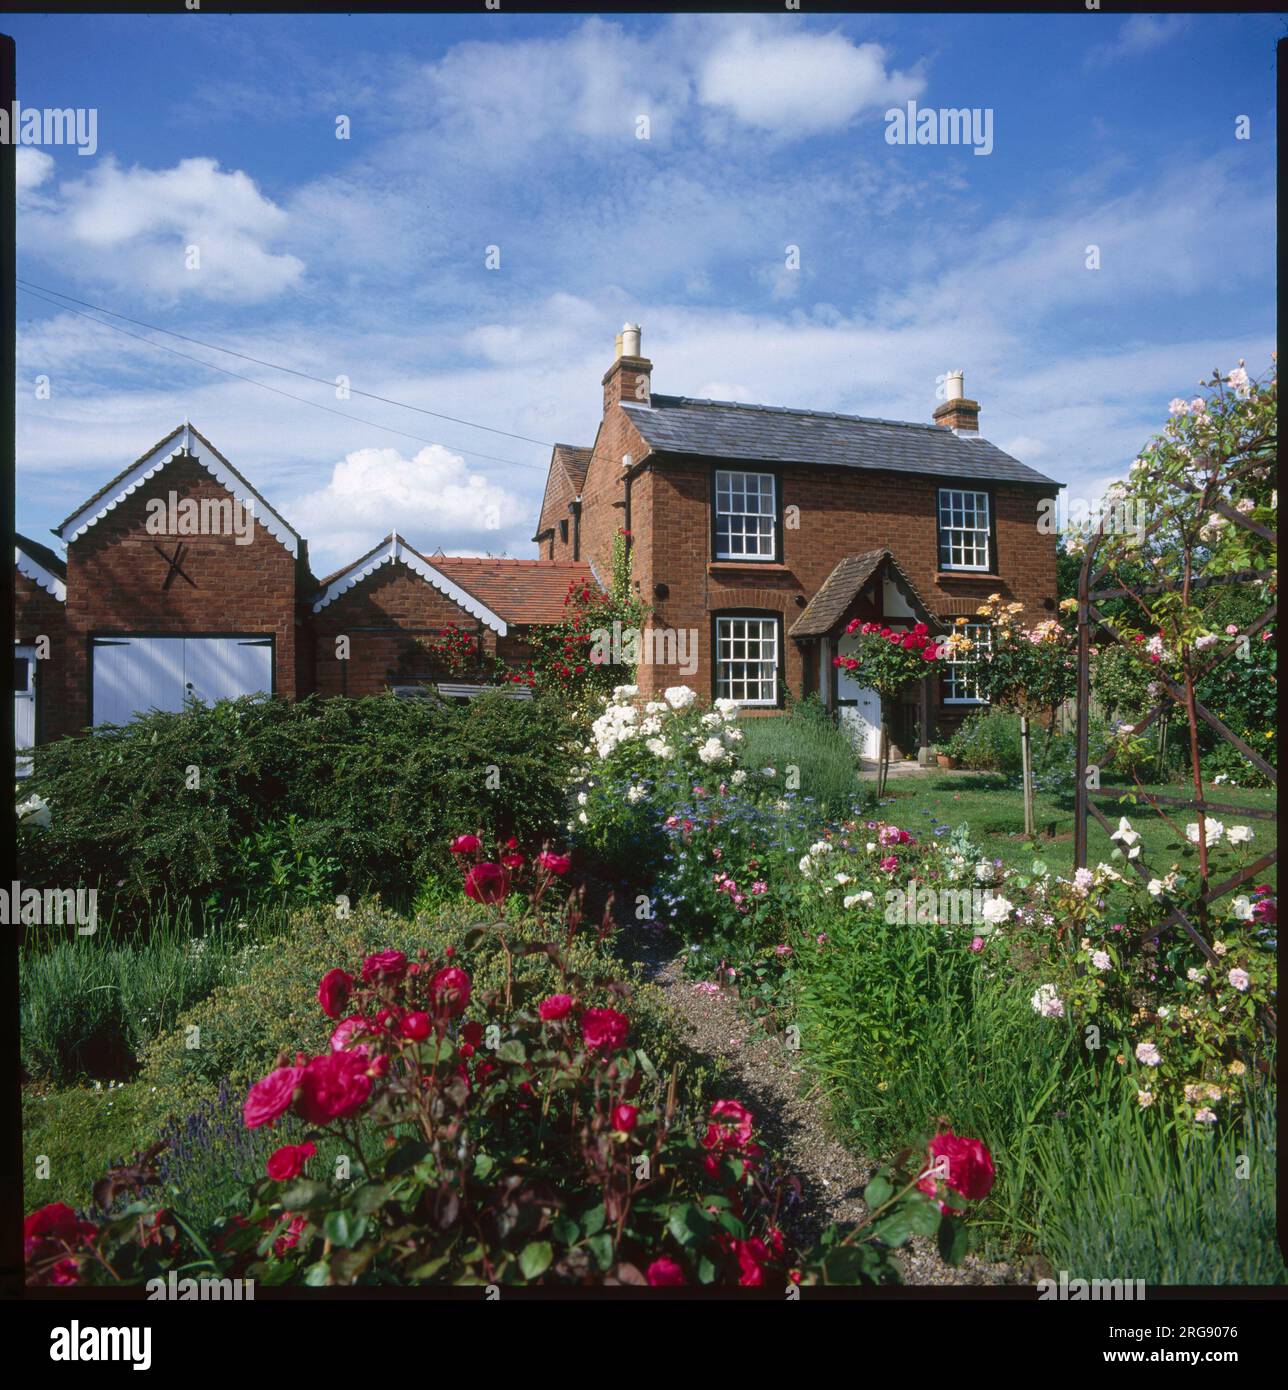 SIR EDWARD ELGAR This lovely English country house, with roses in the garden, is the birthplace of composer Sir Edward Elgar (1857 - 1934). Stock Photo